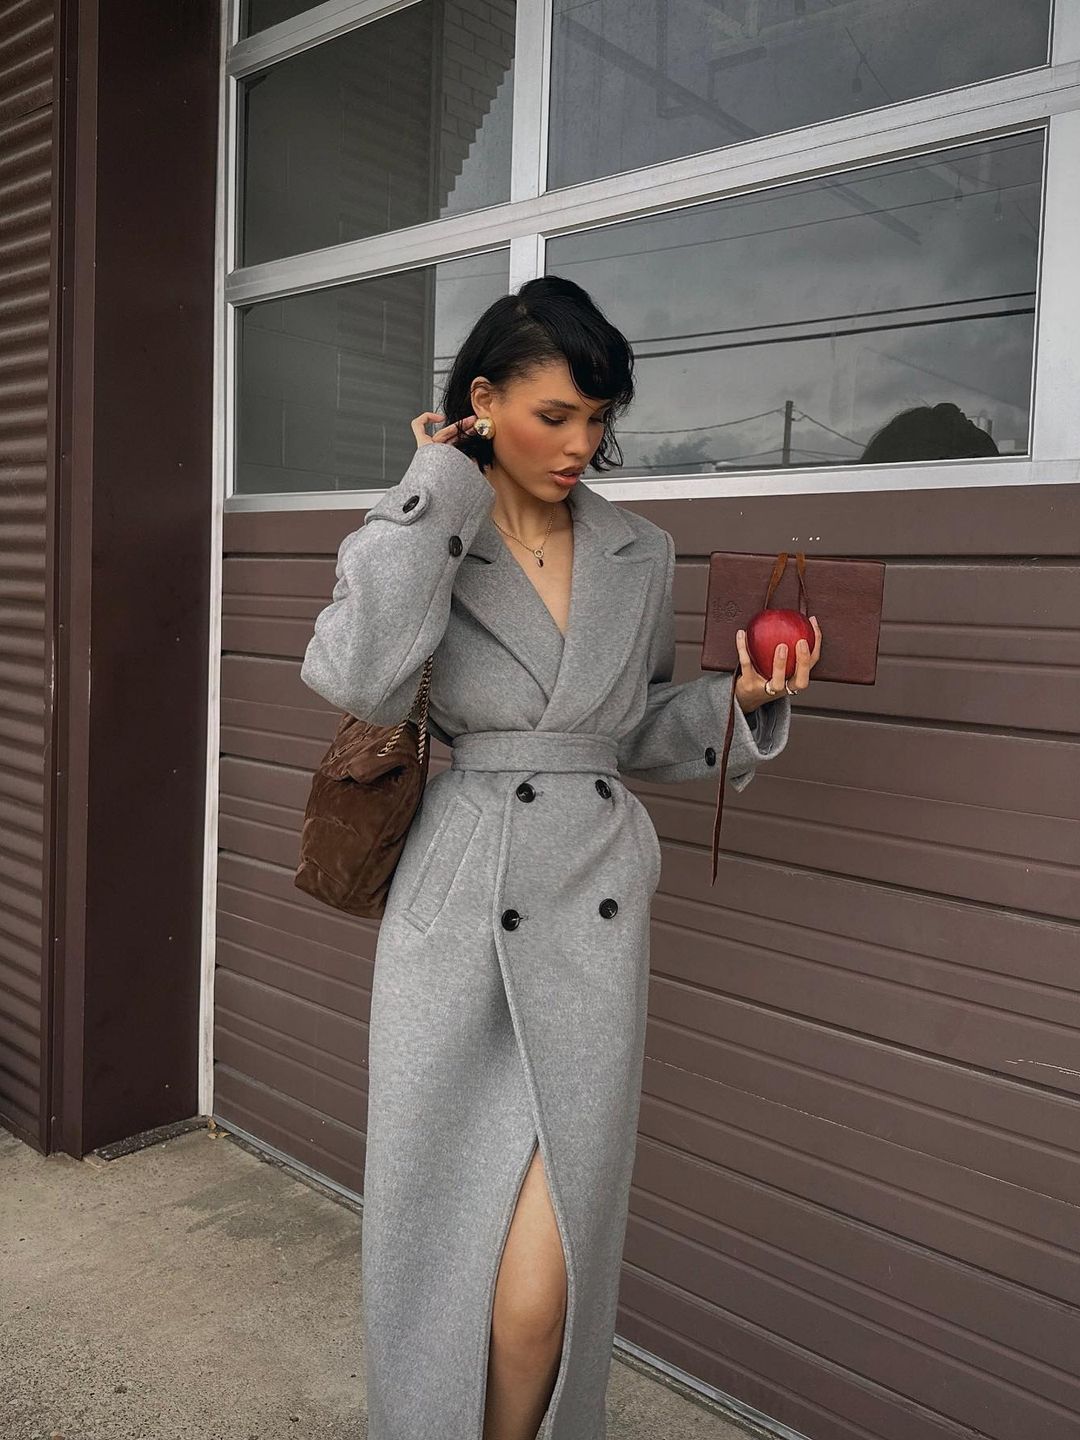 Nara Smith poses in a grey coat with an apple 